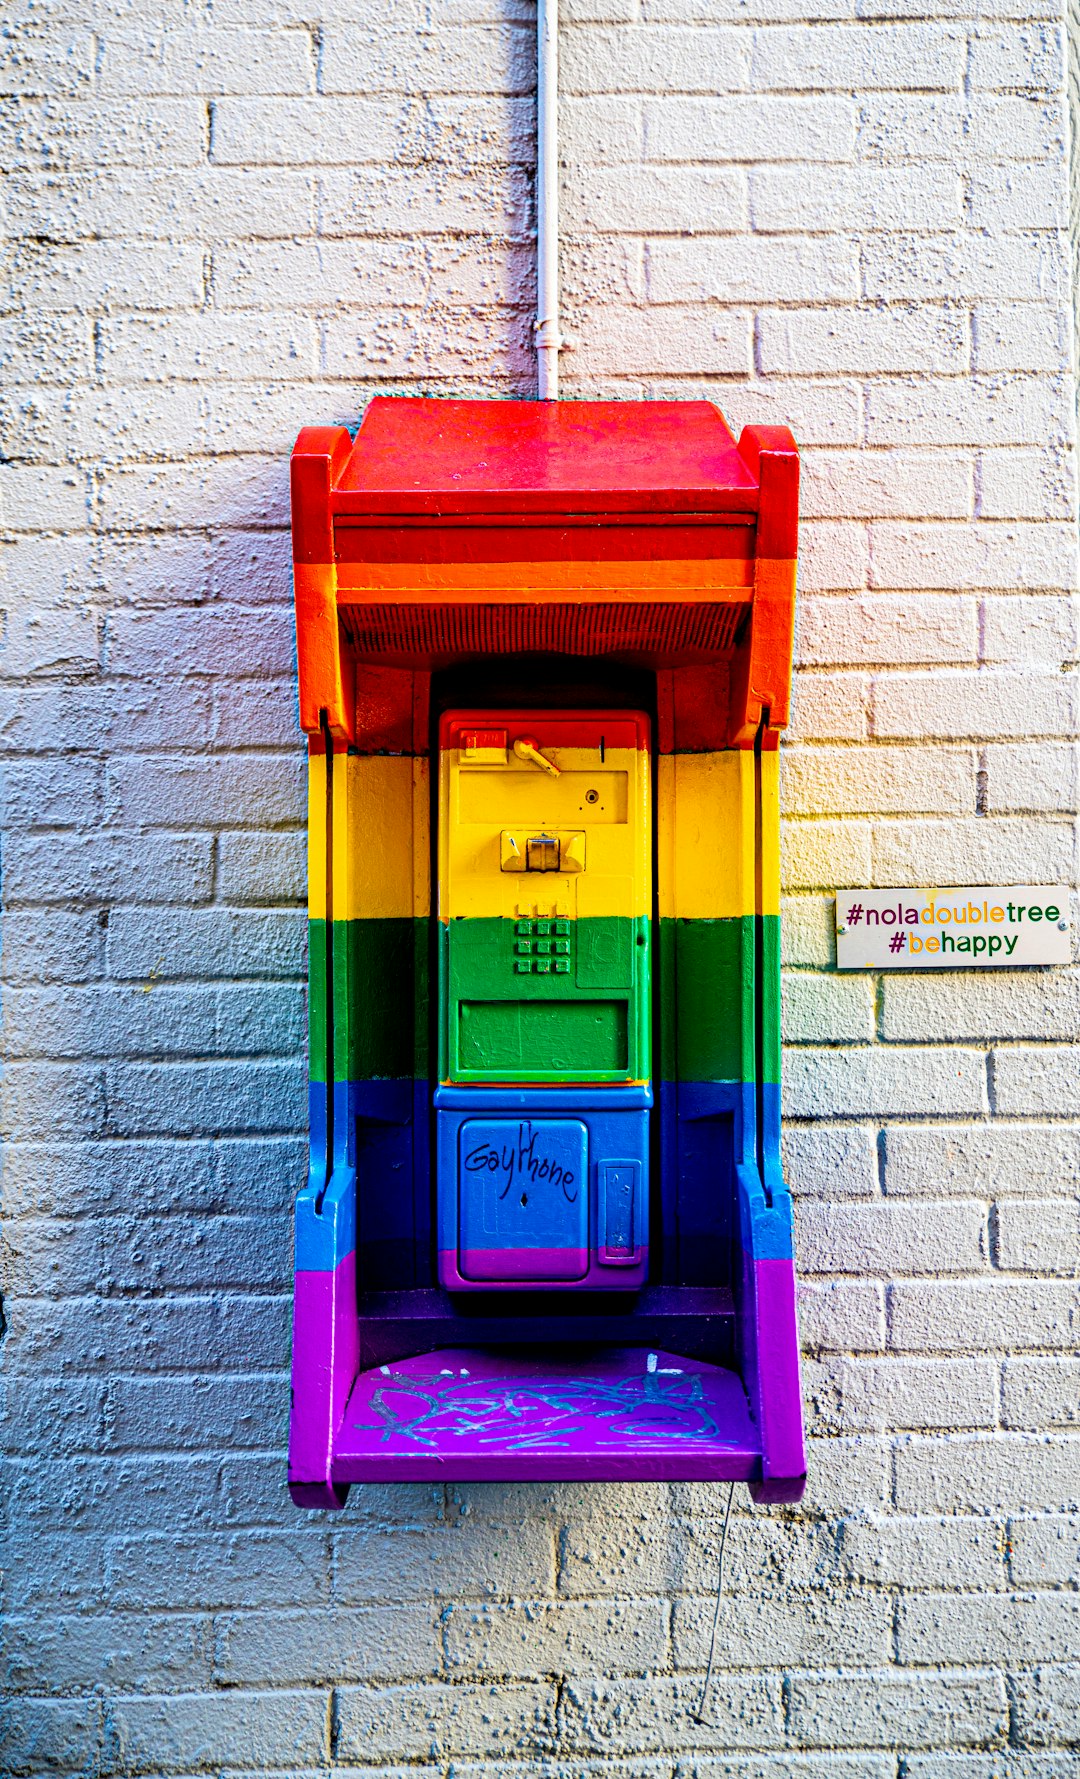 red, yellow, green, and purple payphone